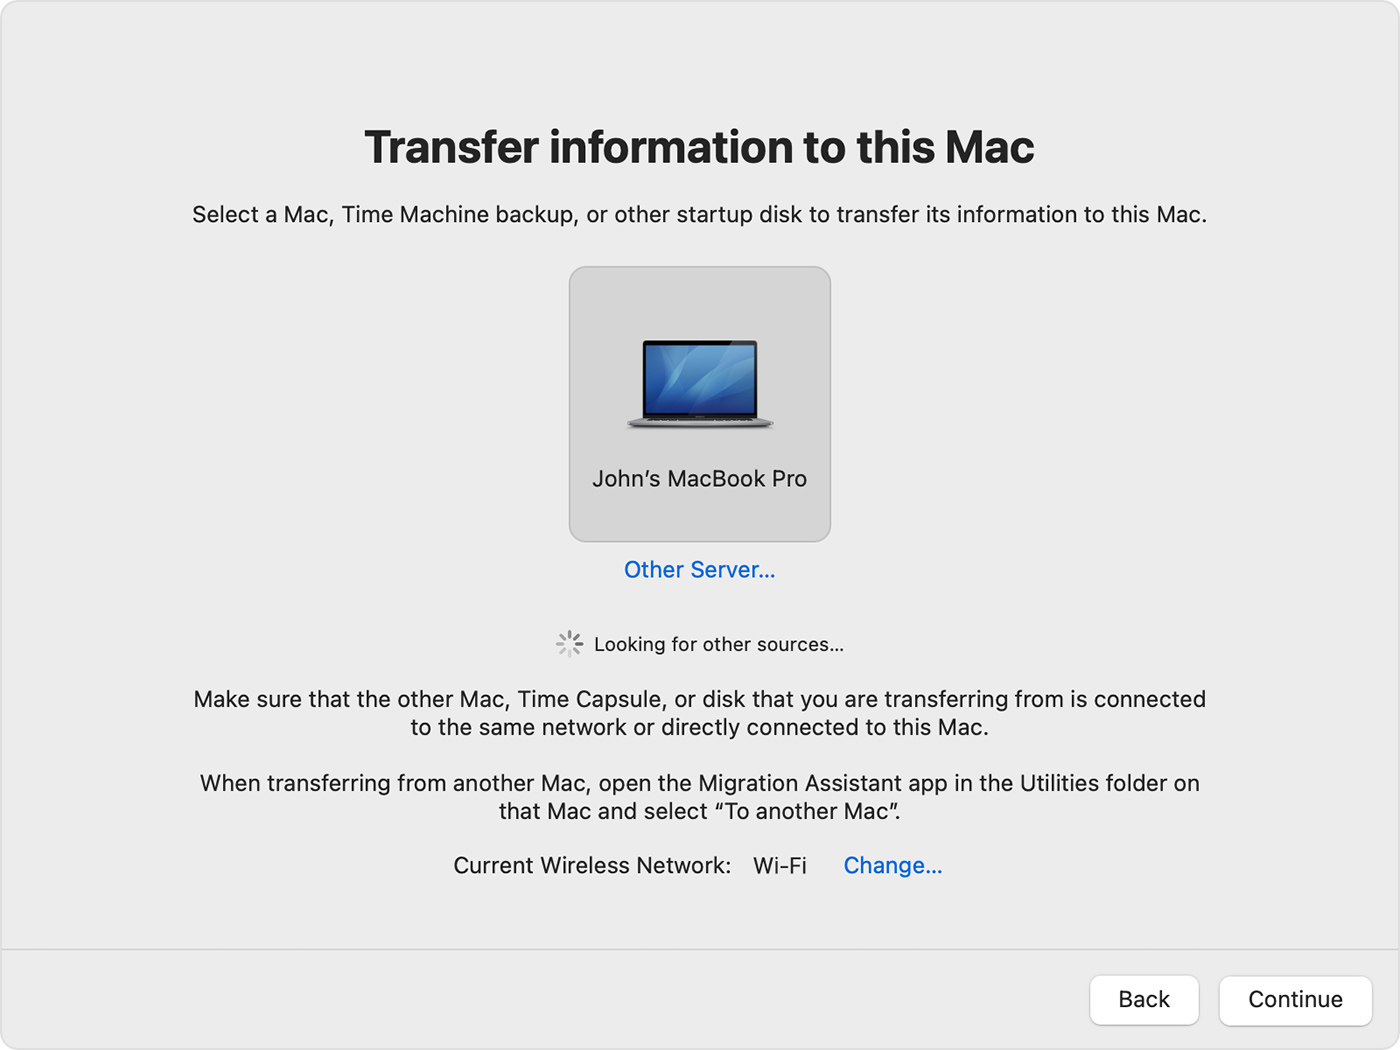 Now, on your new Mac, select the other Mac option, then click Continue. 